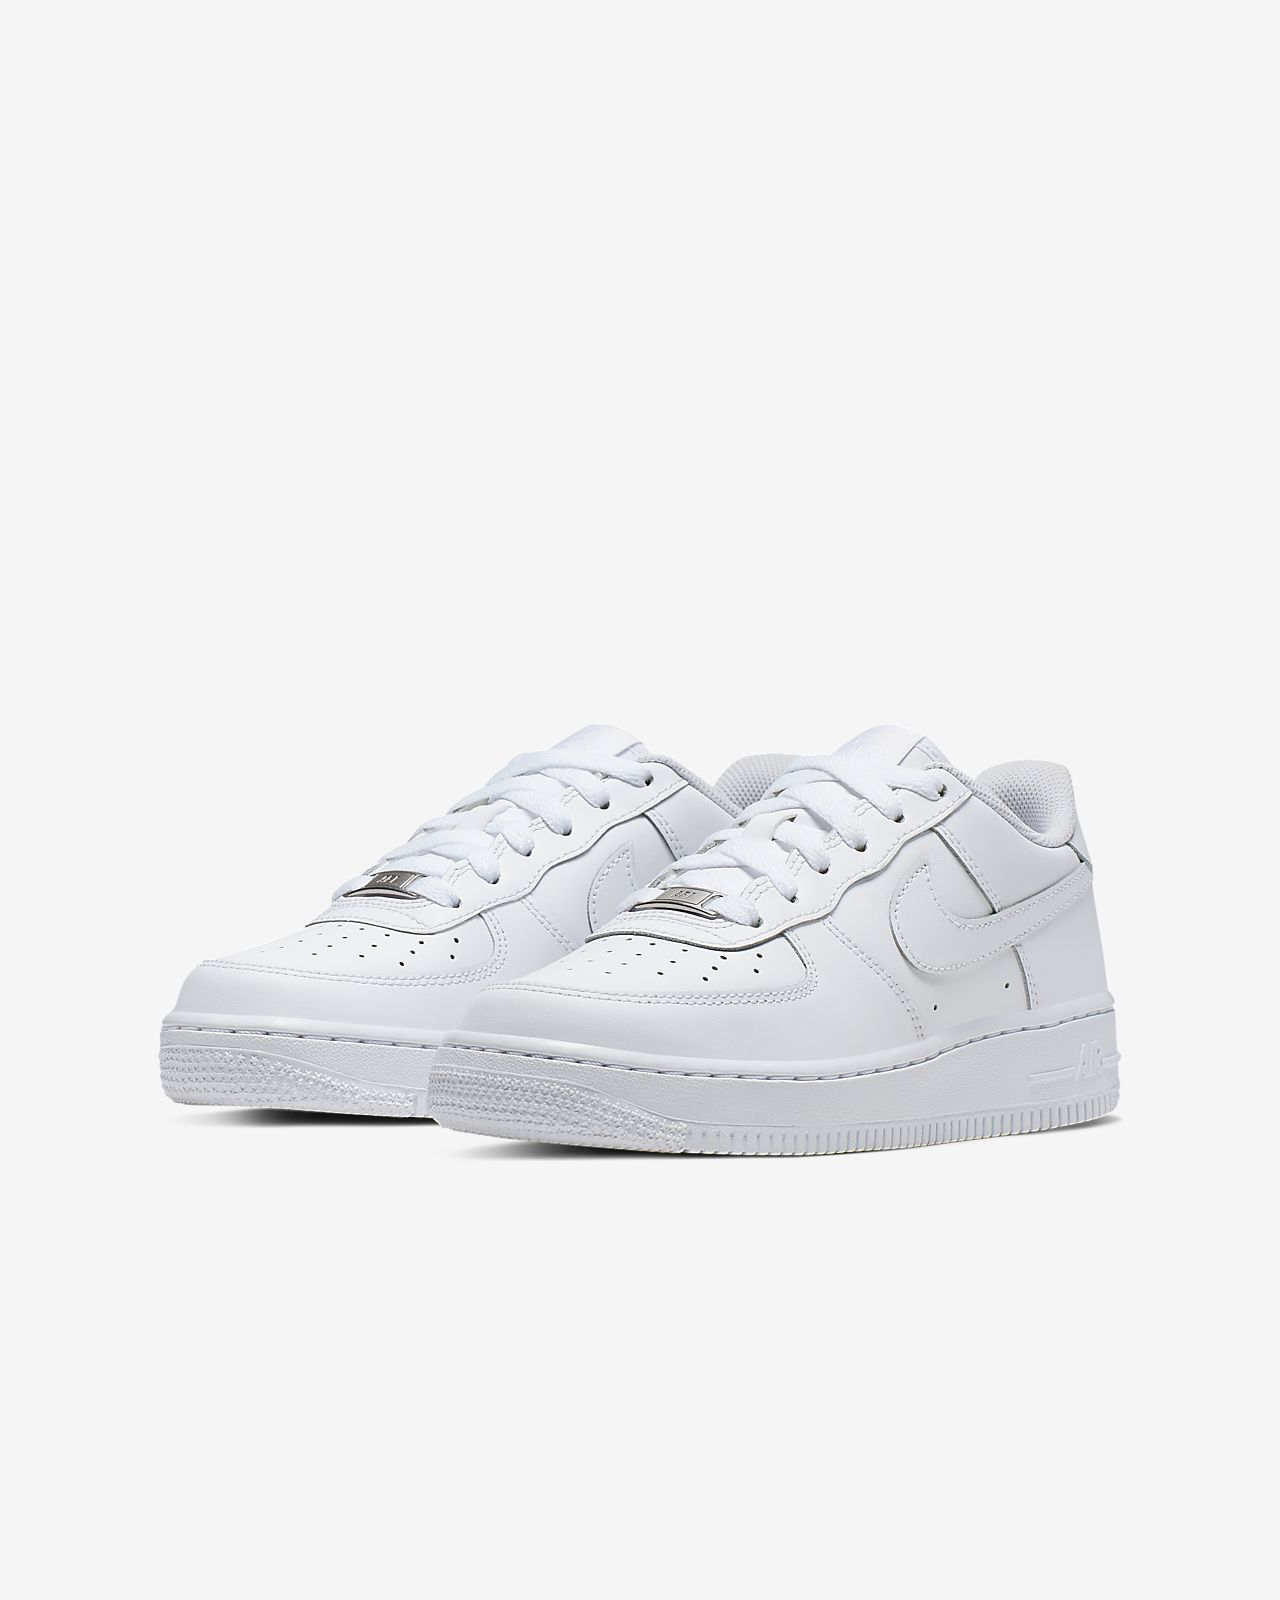 5.5 youth air force 1